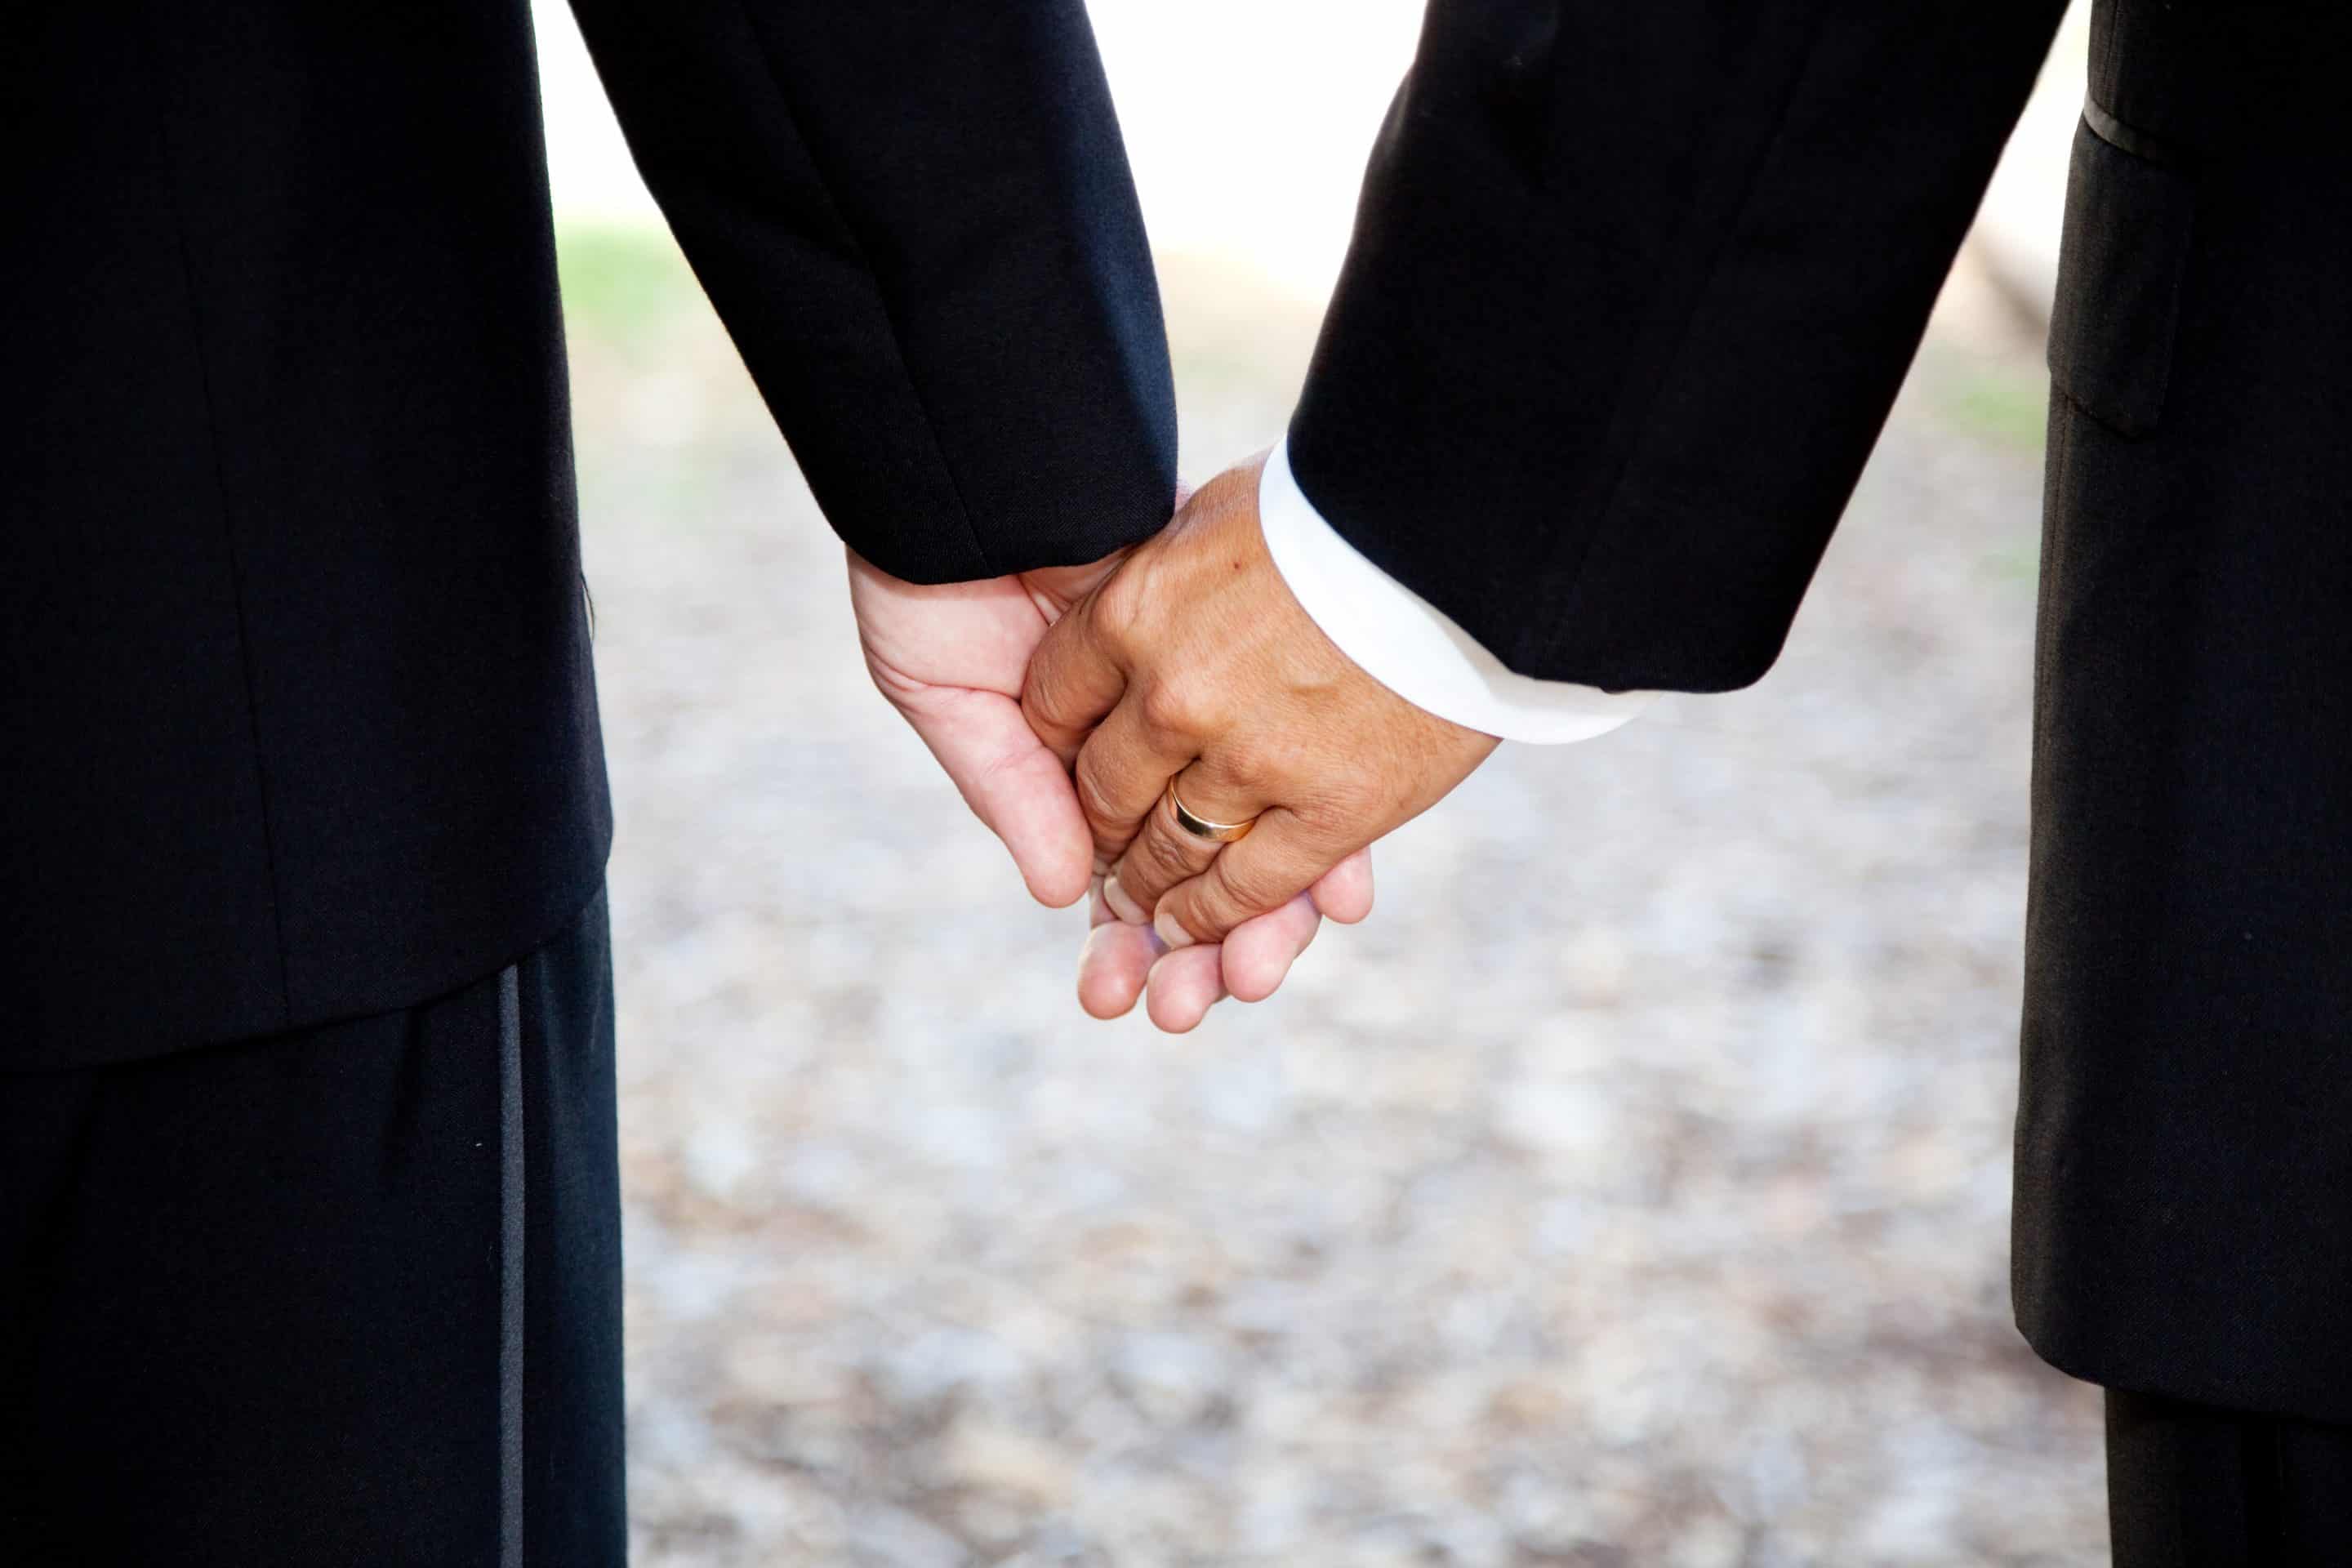 Dissolution of a civil partnership - LGBT Lawyers - we can help